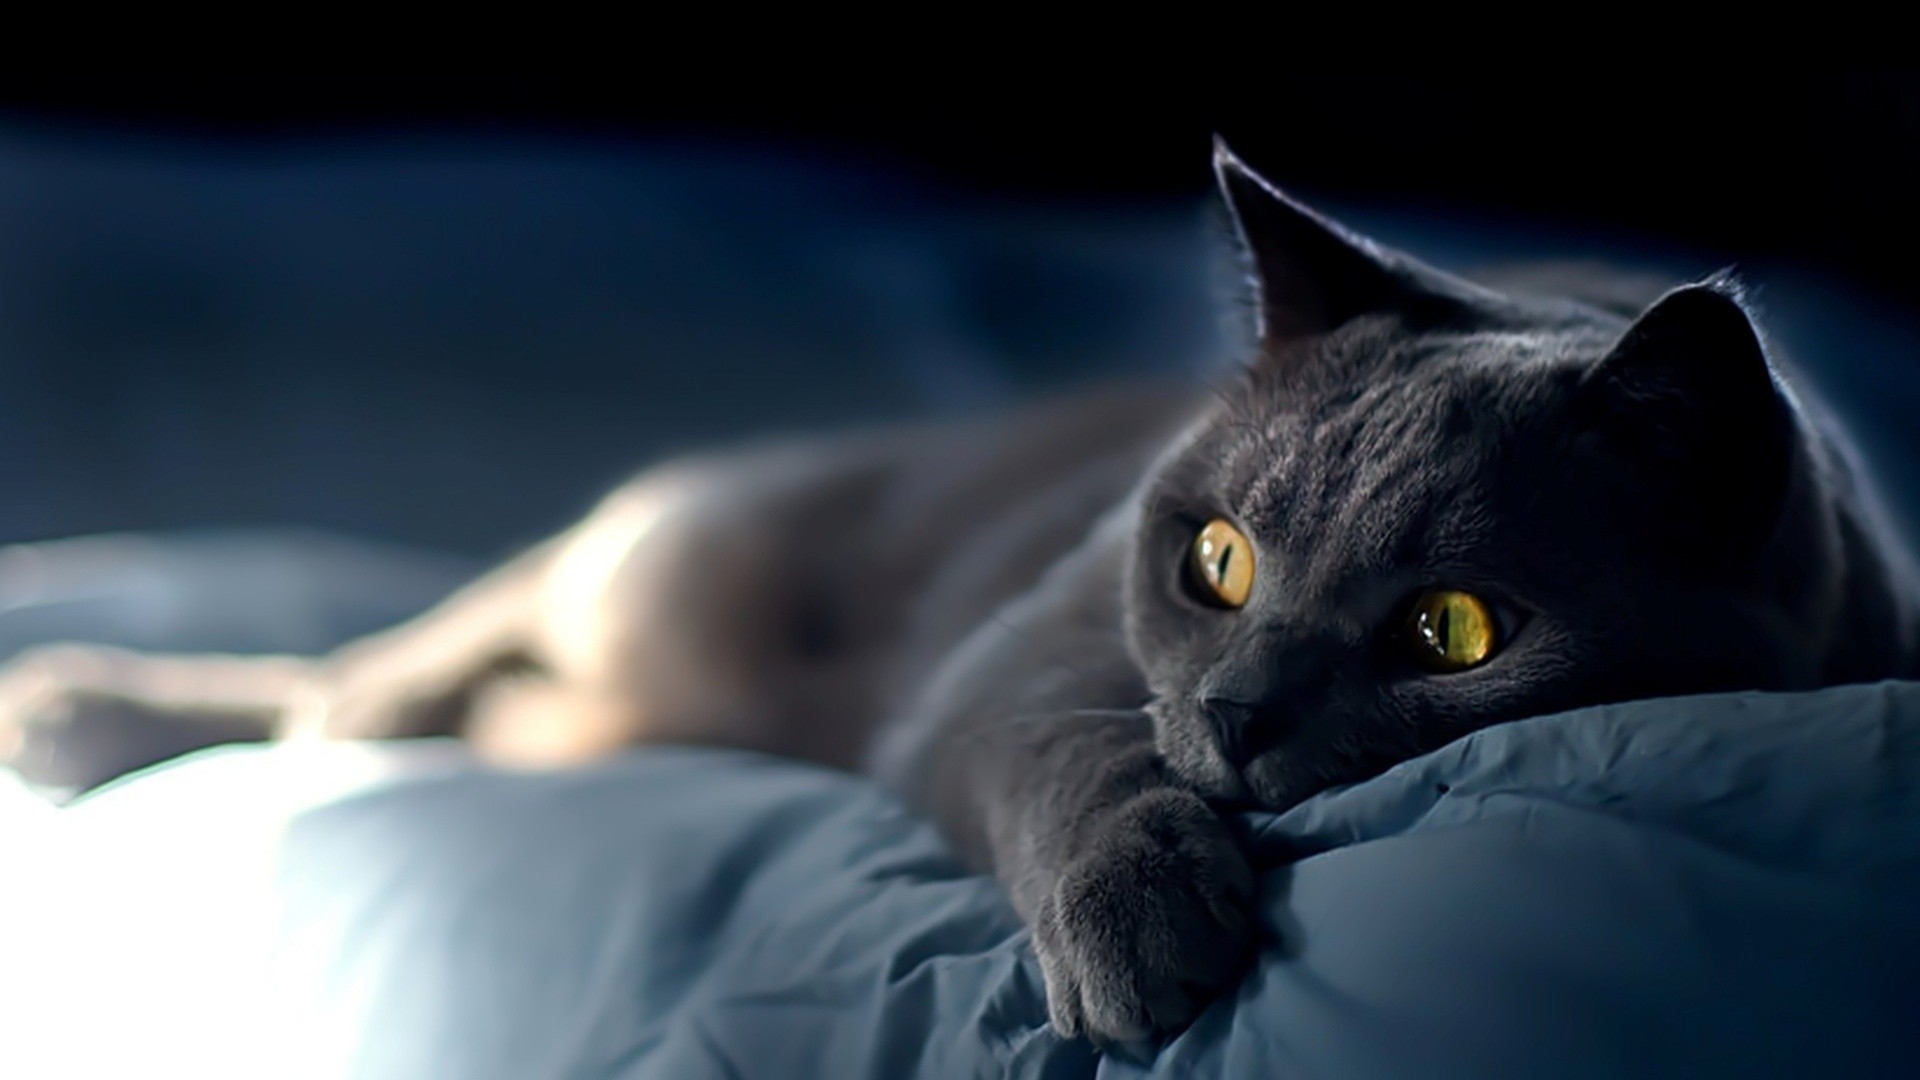 1920x1080  Cat on blue sheets. How to set wallpaper on your desktop? Click  the download link from above and set the wallpaper on the desktop from your  OS.